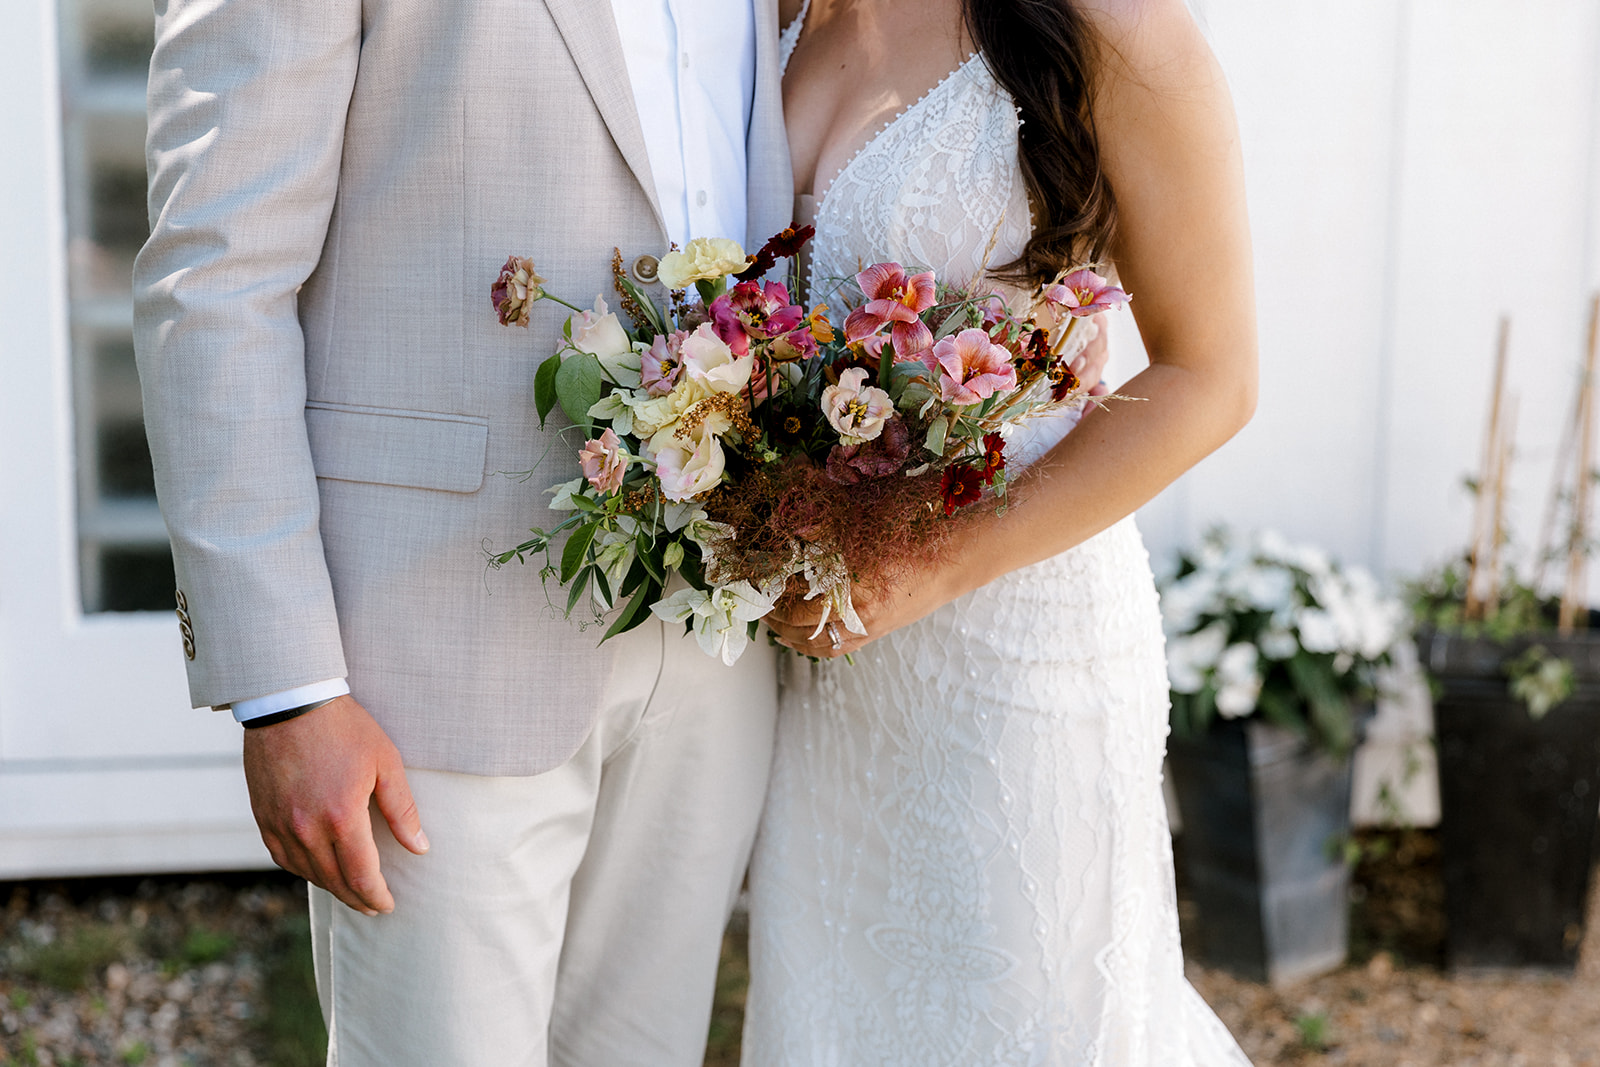 a photo of the bride and groom holding the bridal bouquet